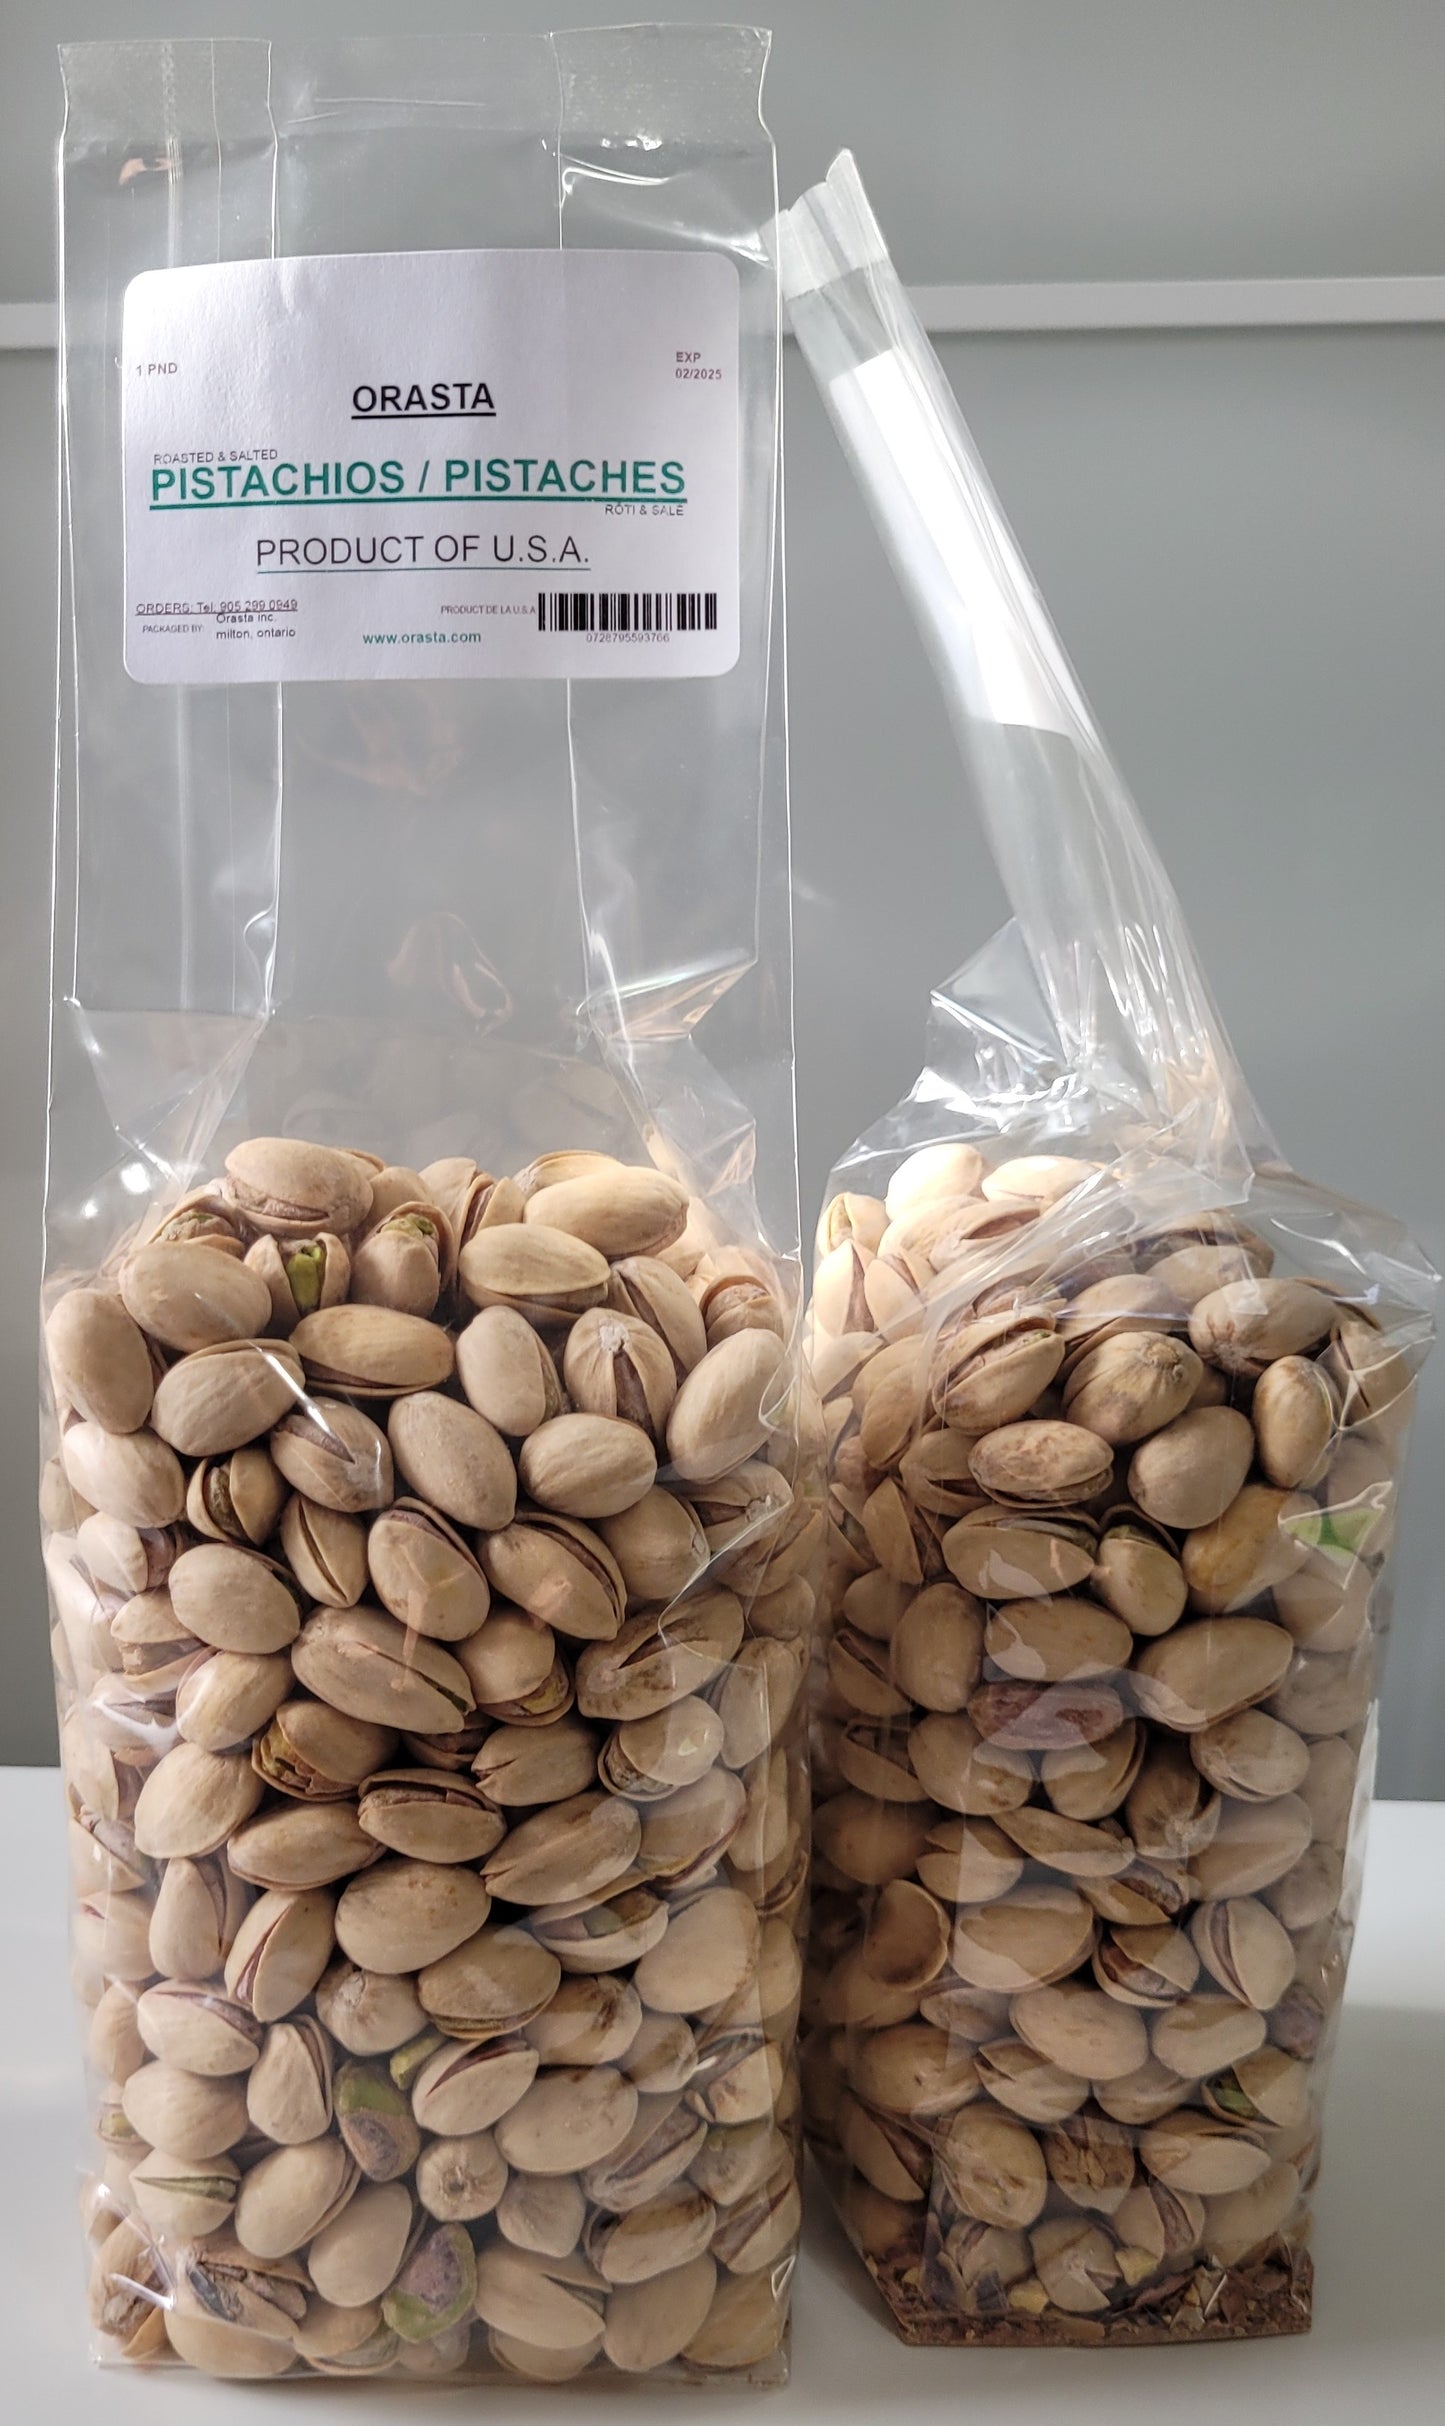 PISTACHIOS IN SHELL, ROASTED & SALTED (U.S.A.) - 1 PND